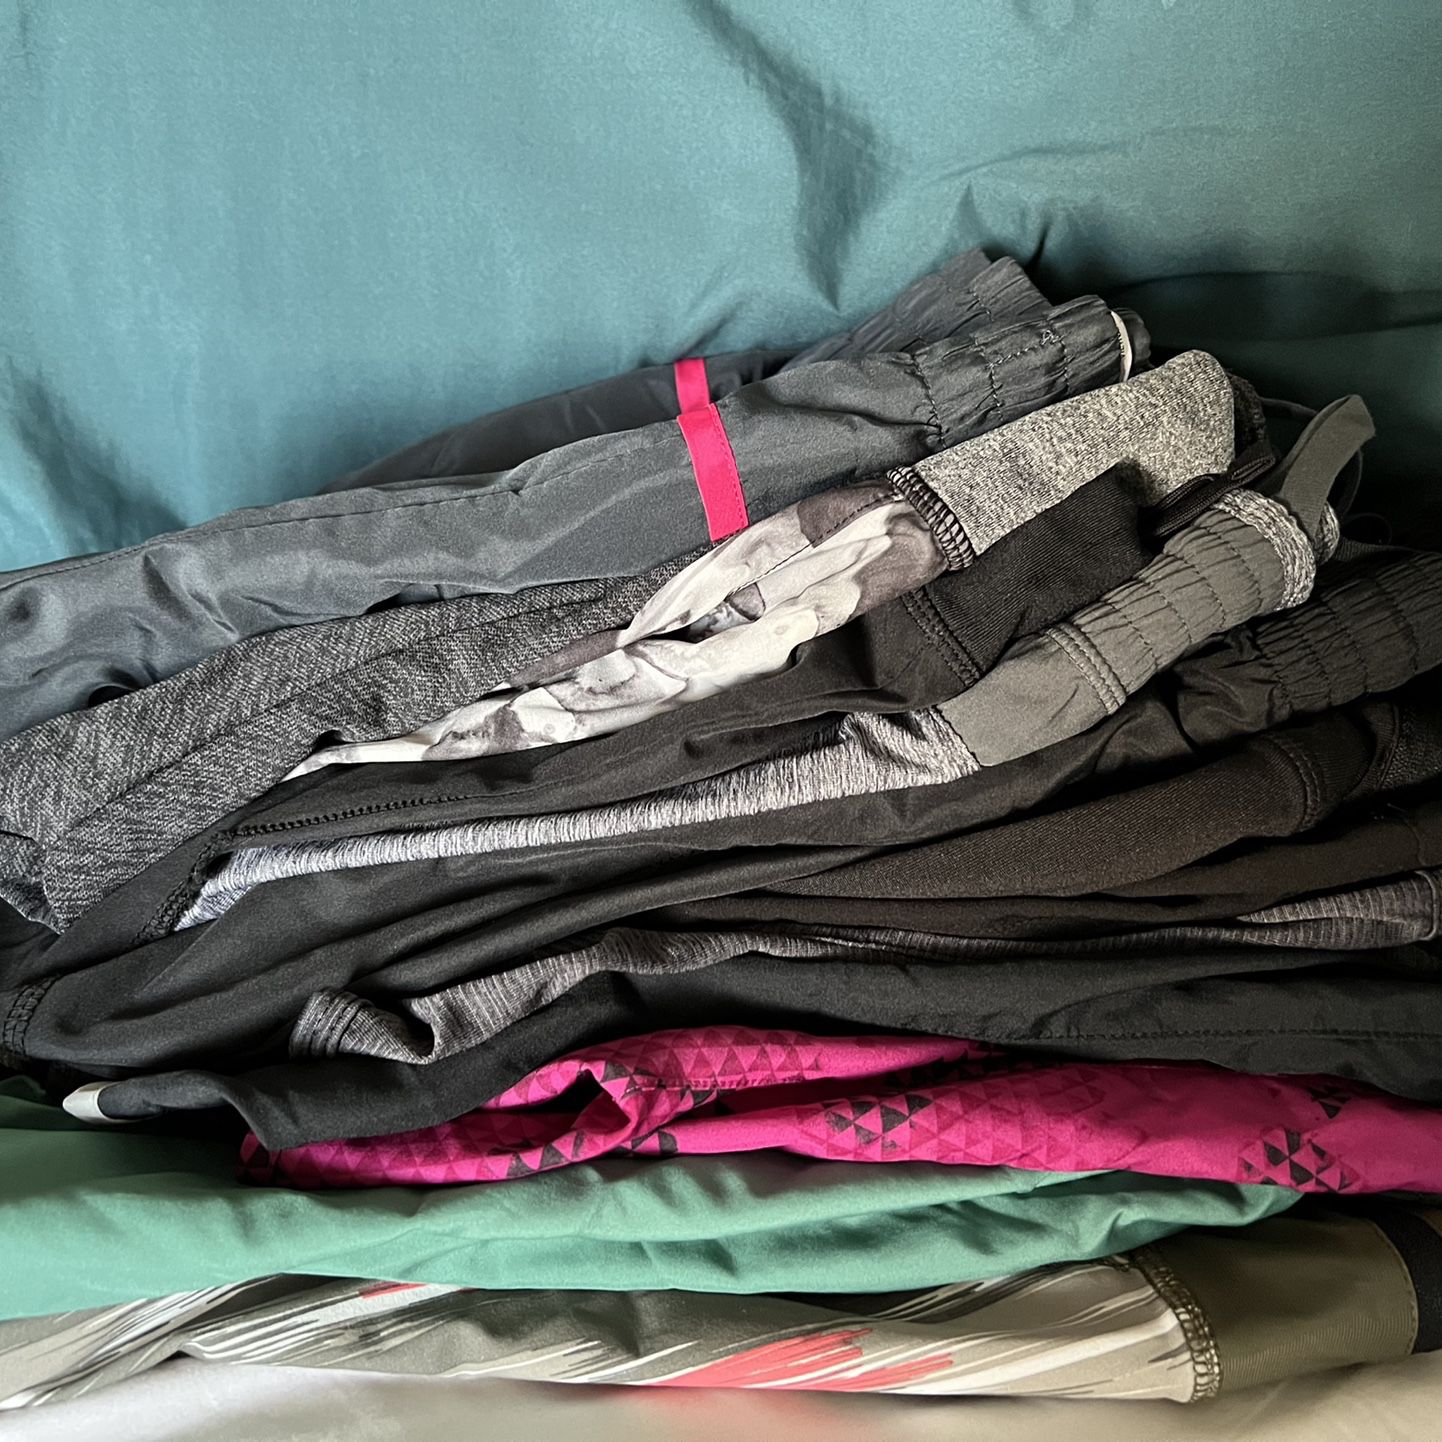 7 Pairs Of Workout Shorts for Sale in Hanford, CA - OfferUp